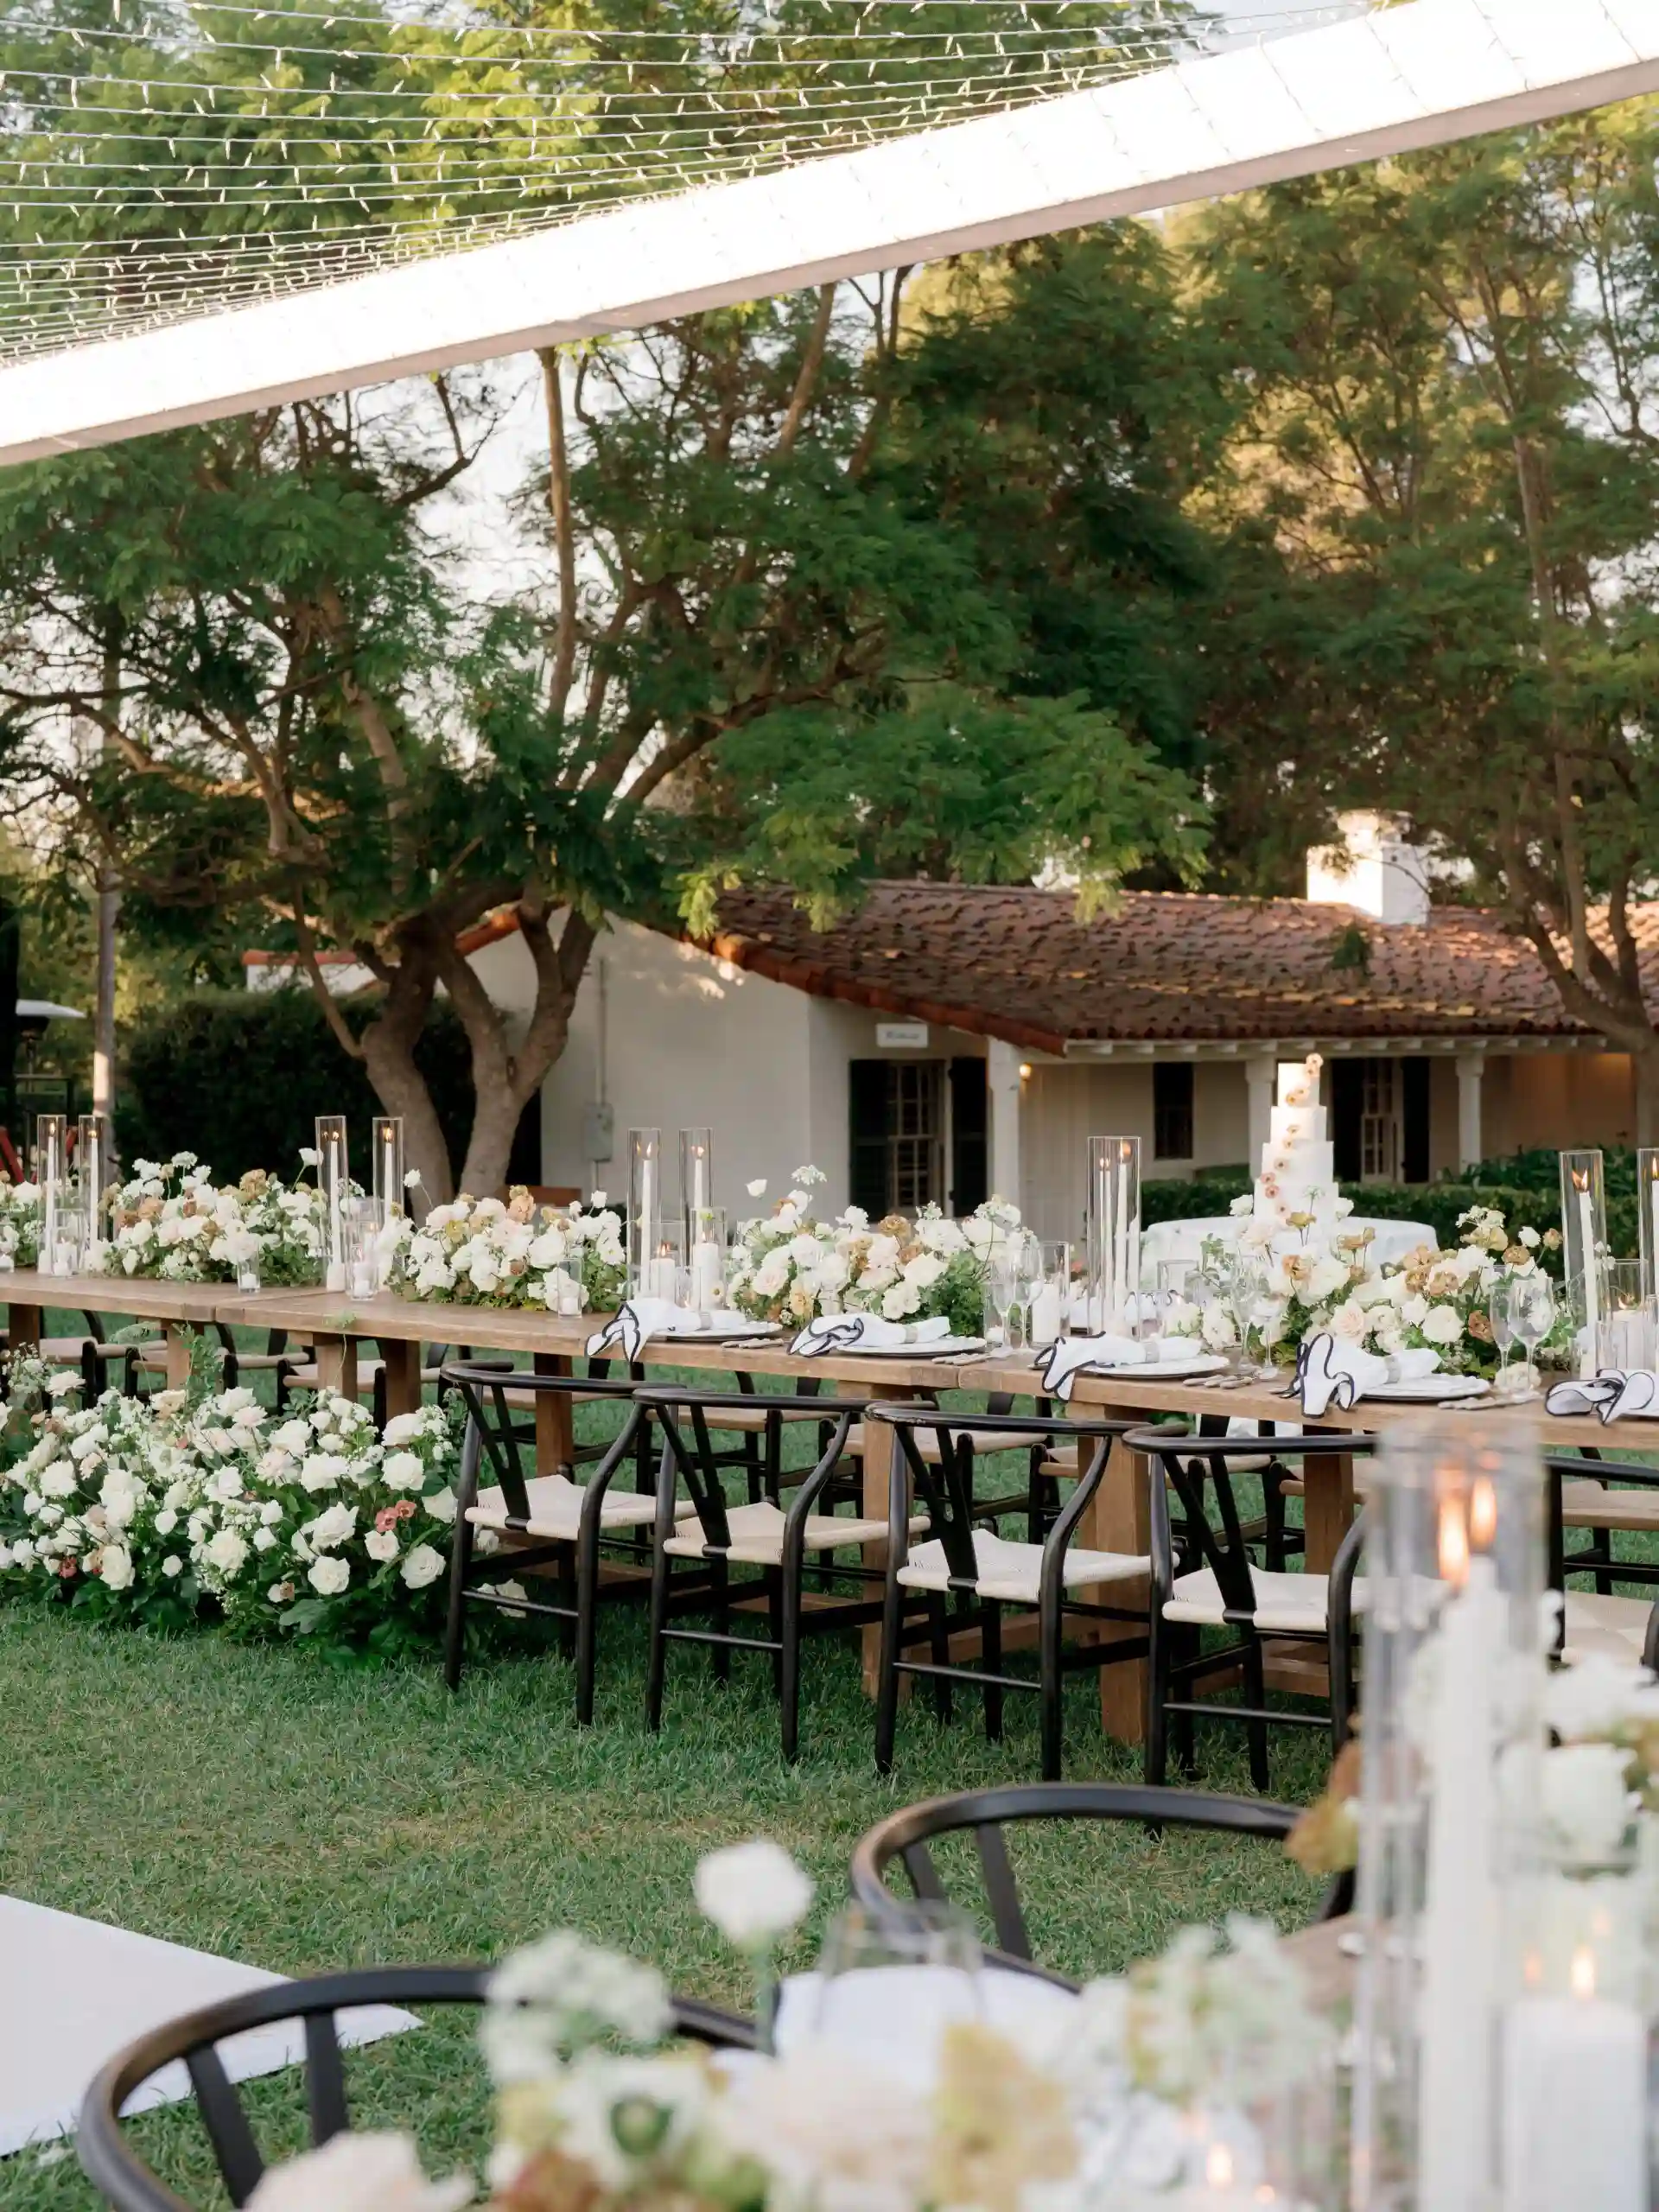 Garden with tables and floral decorations for a wedding at The Inn at Rancho Santa Fe